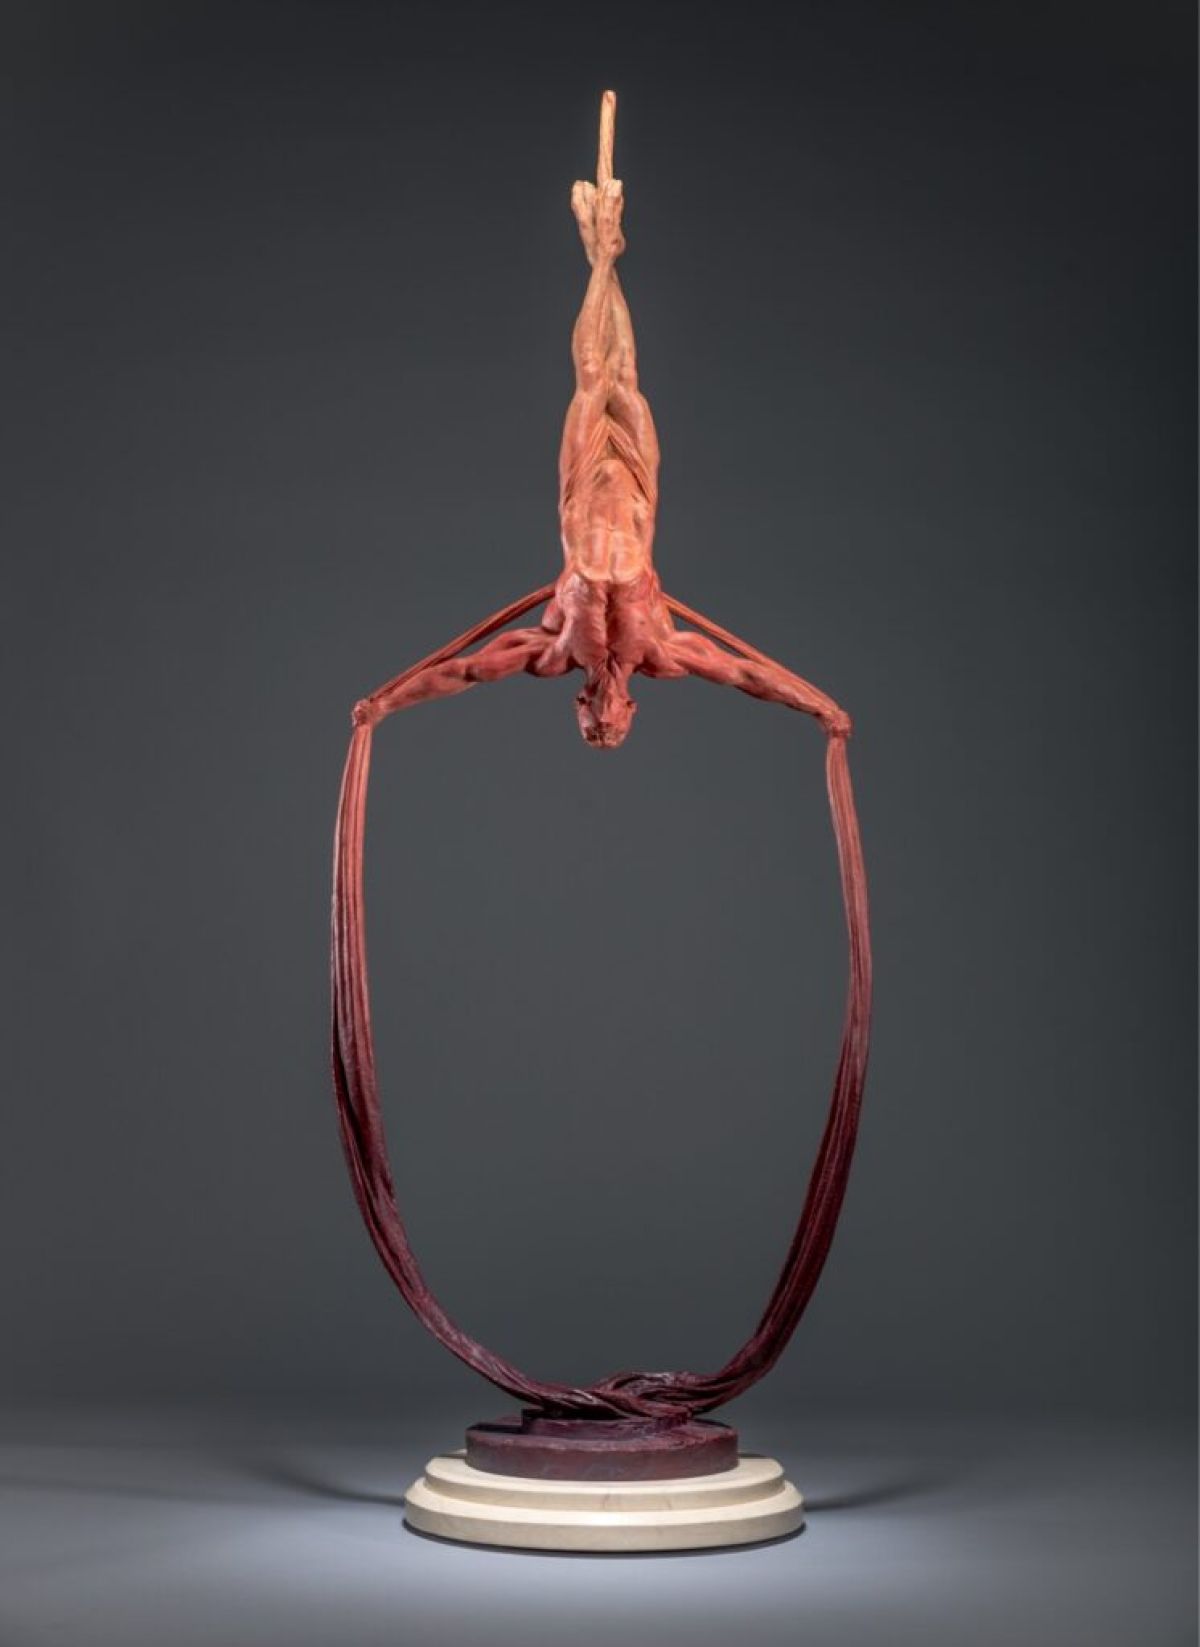 Sculpture: An athletic man hangs upside down, his legs wrapped around silk, the material then extending down and around his outstretched arms and into a loop. It's from the bottom of this aerial silk loop that the sculpture rests. The sculpture is in a gradient linear red.